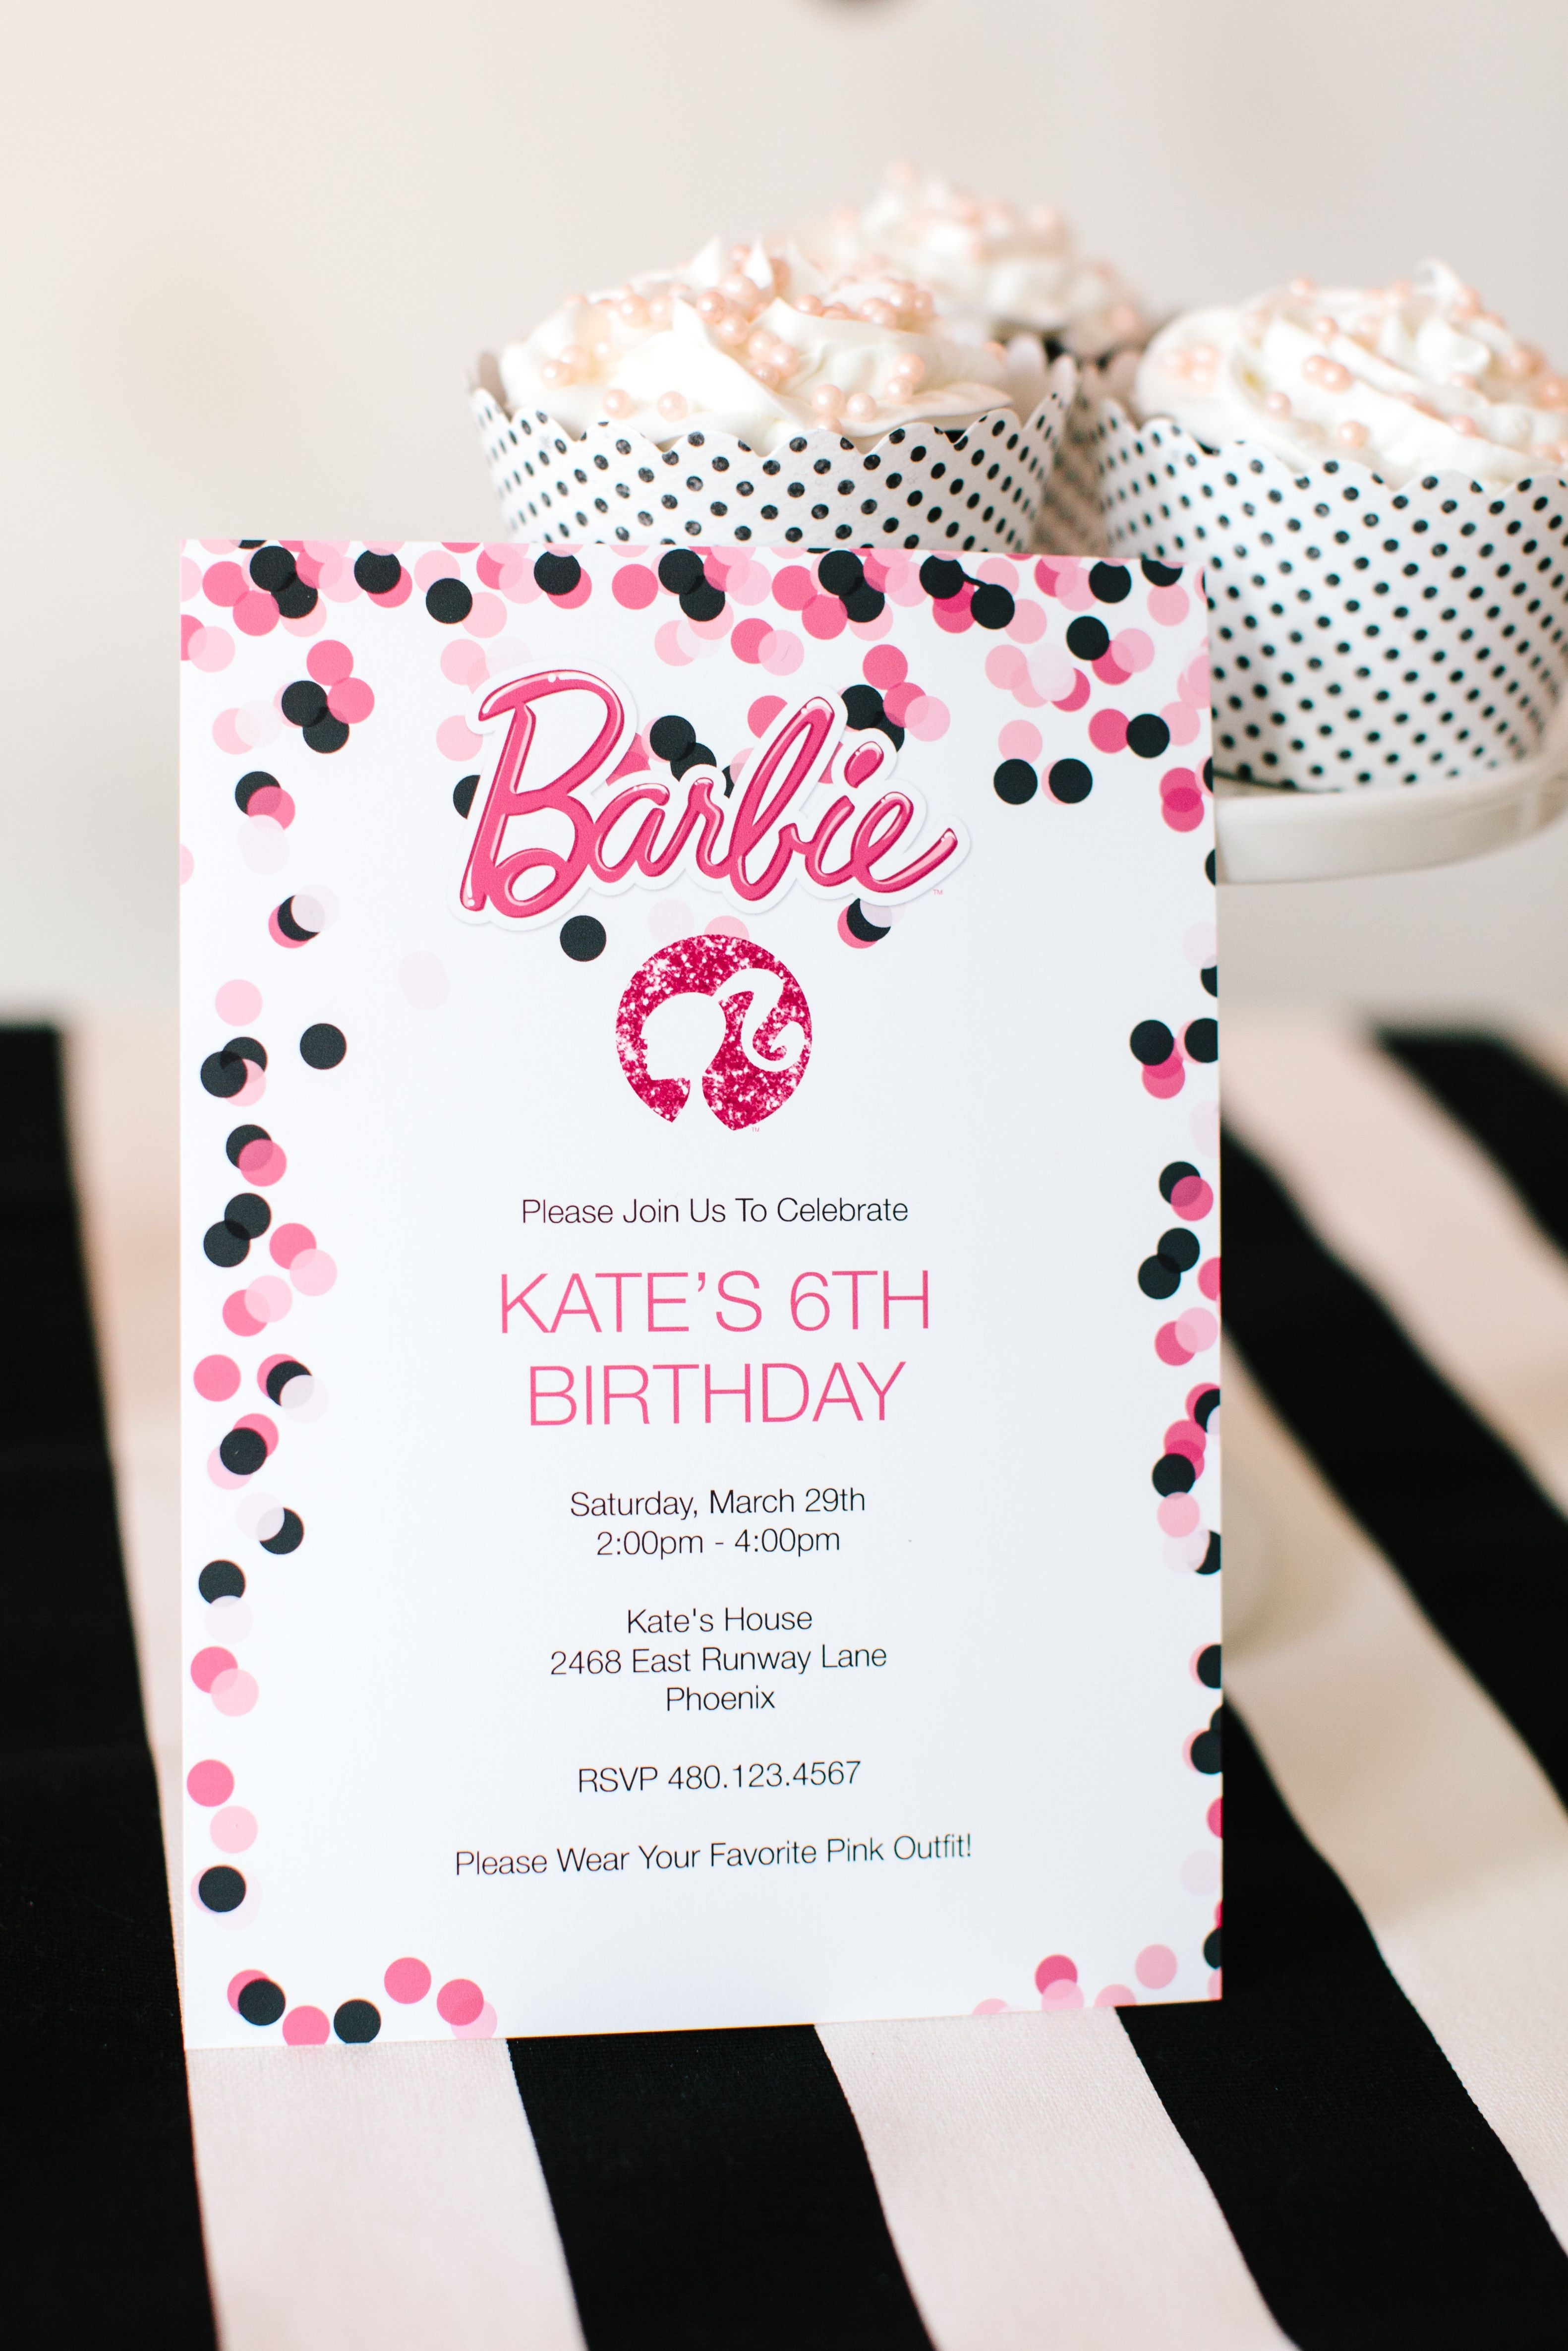 Barbie Birthday Party With Free Printable Barbie Designs - Free Printable Barbie Birthday Party Invitations